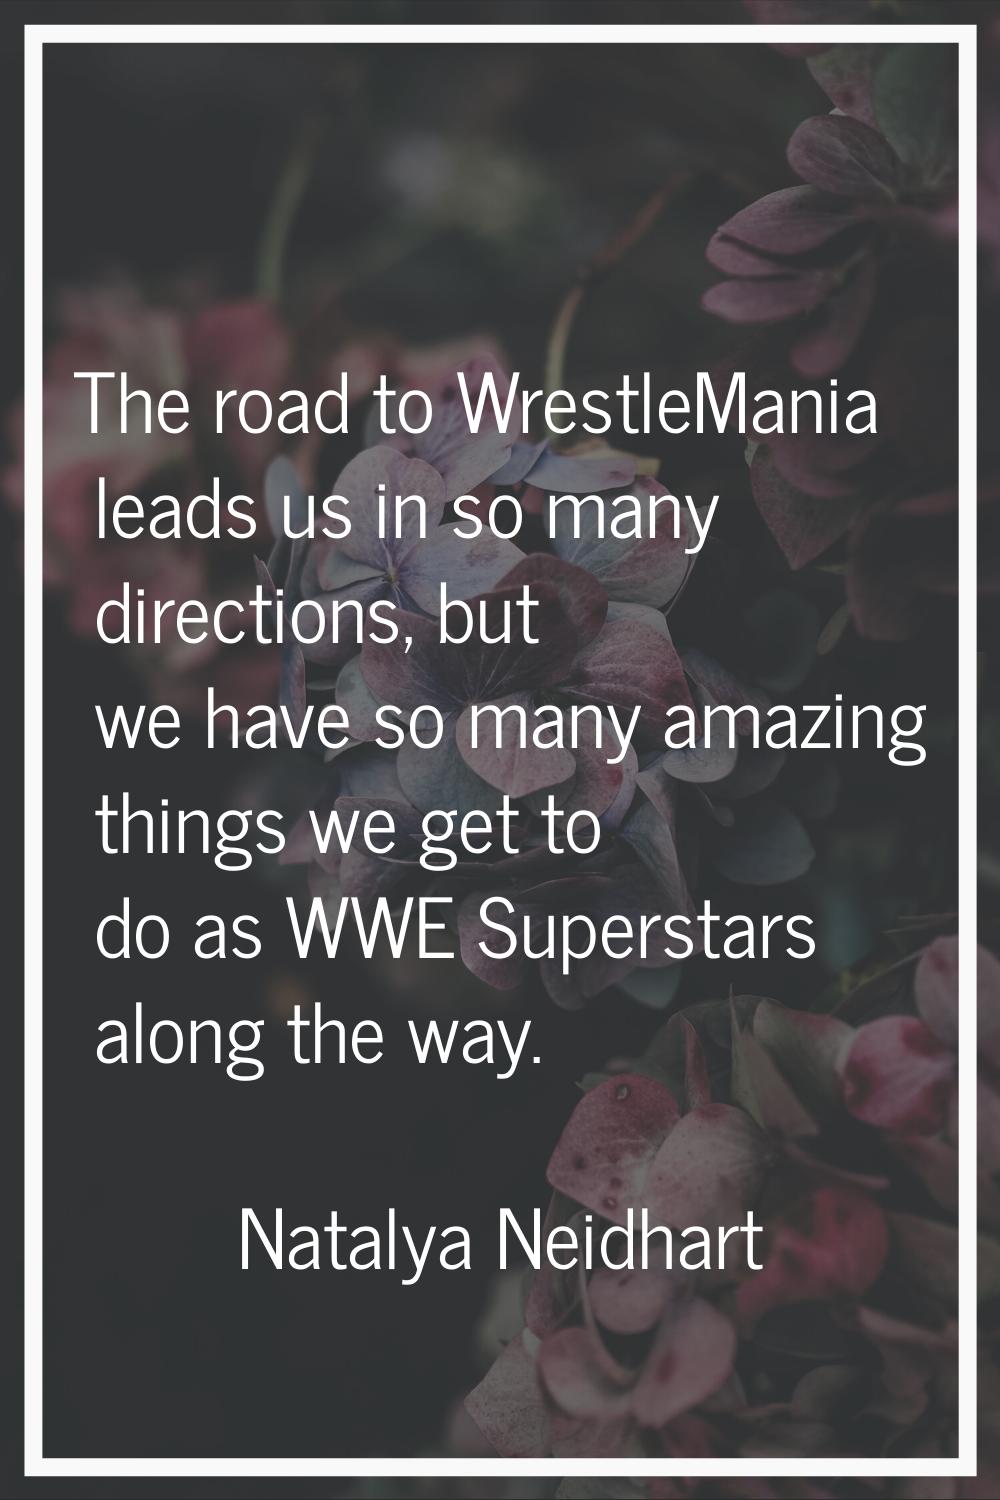 The road to WrestleMania leads us in so many directions, but we have so many amazing things we get 